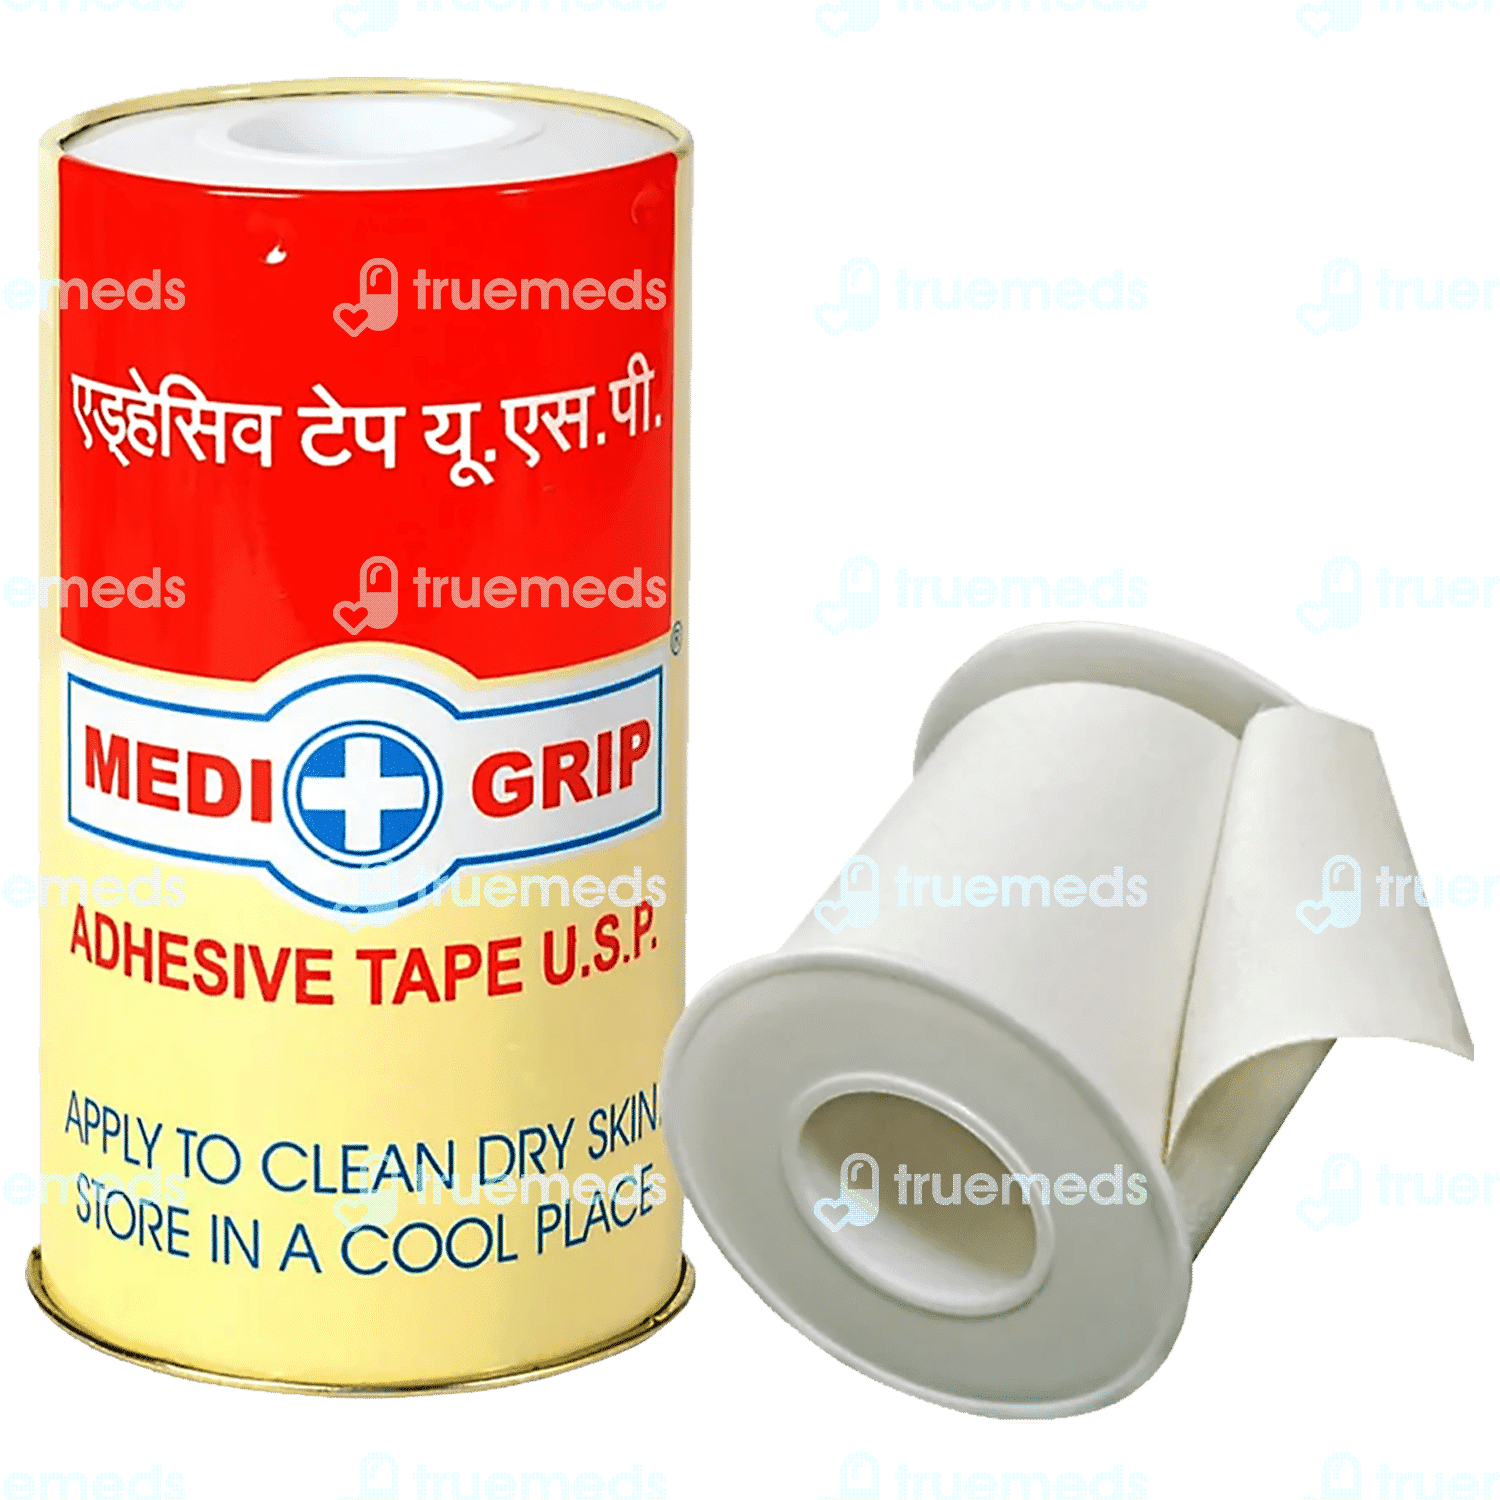 Medigrip 10 Cm X 5 M Adhesive Tape Usp 1 - Uses, Side Effects